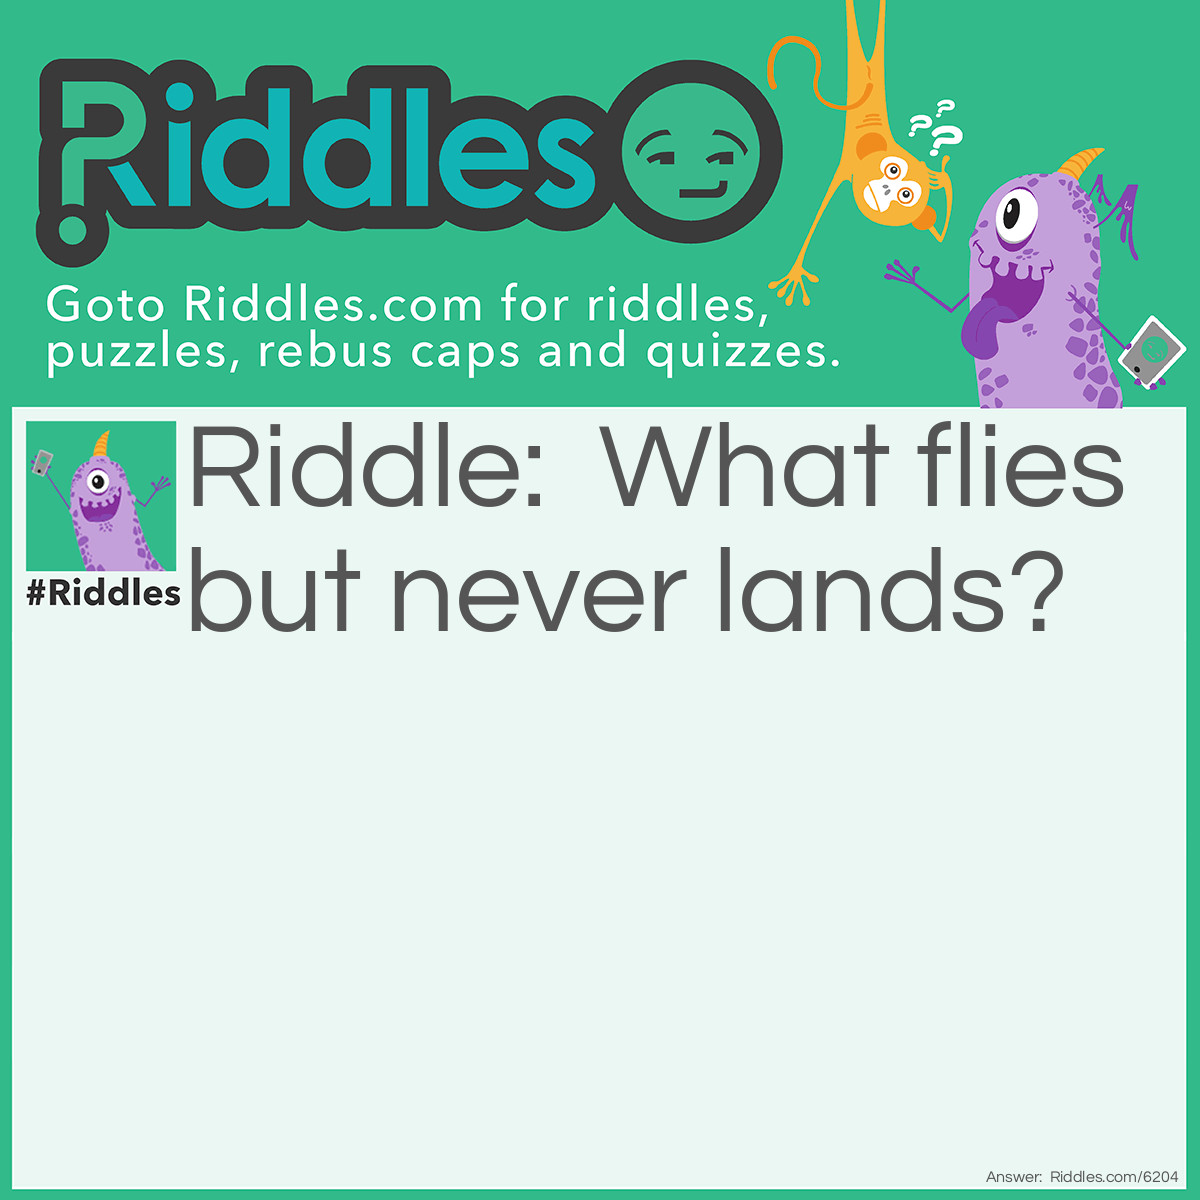 Riddle: What flies but never lands? Answer: Time.